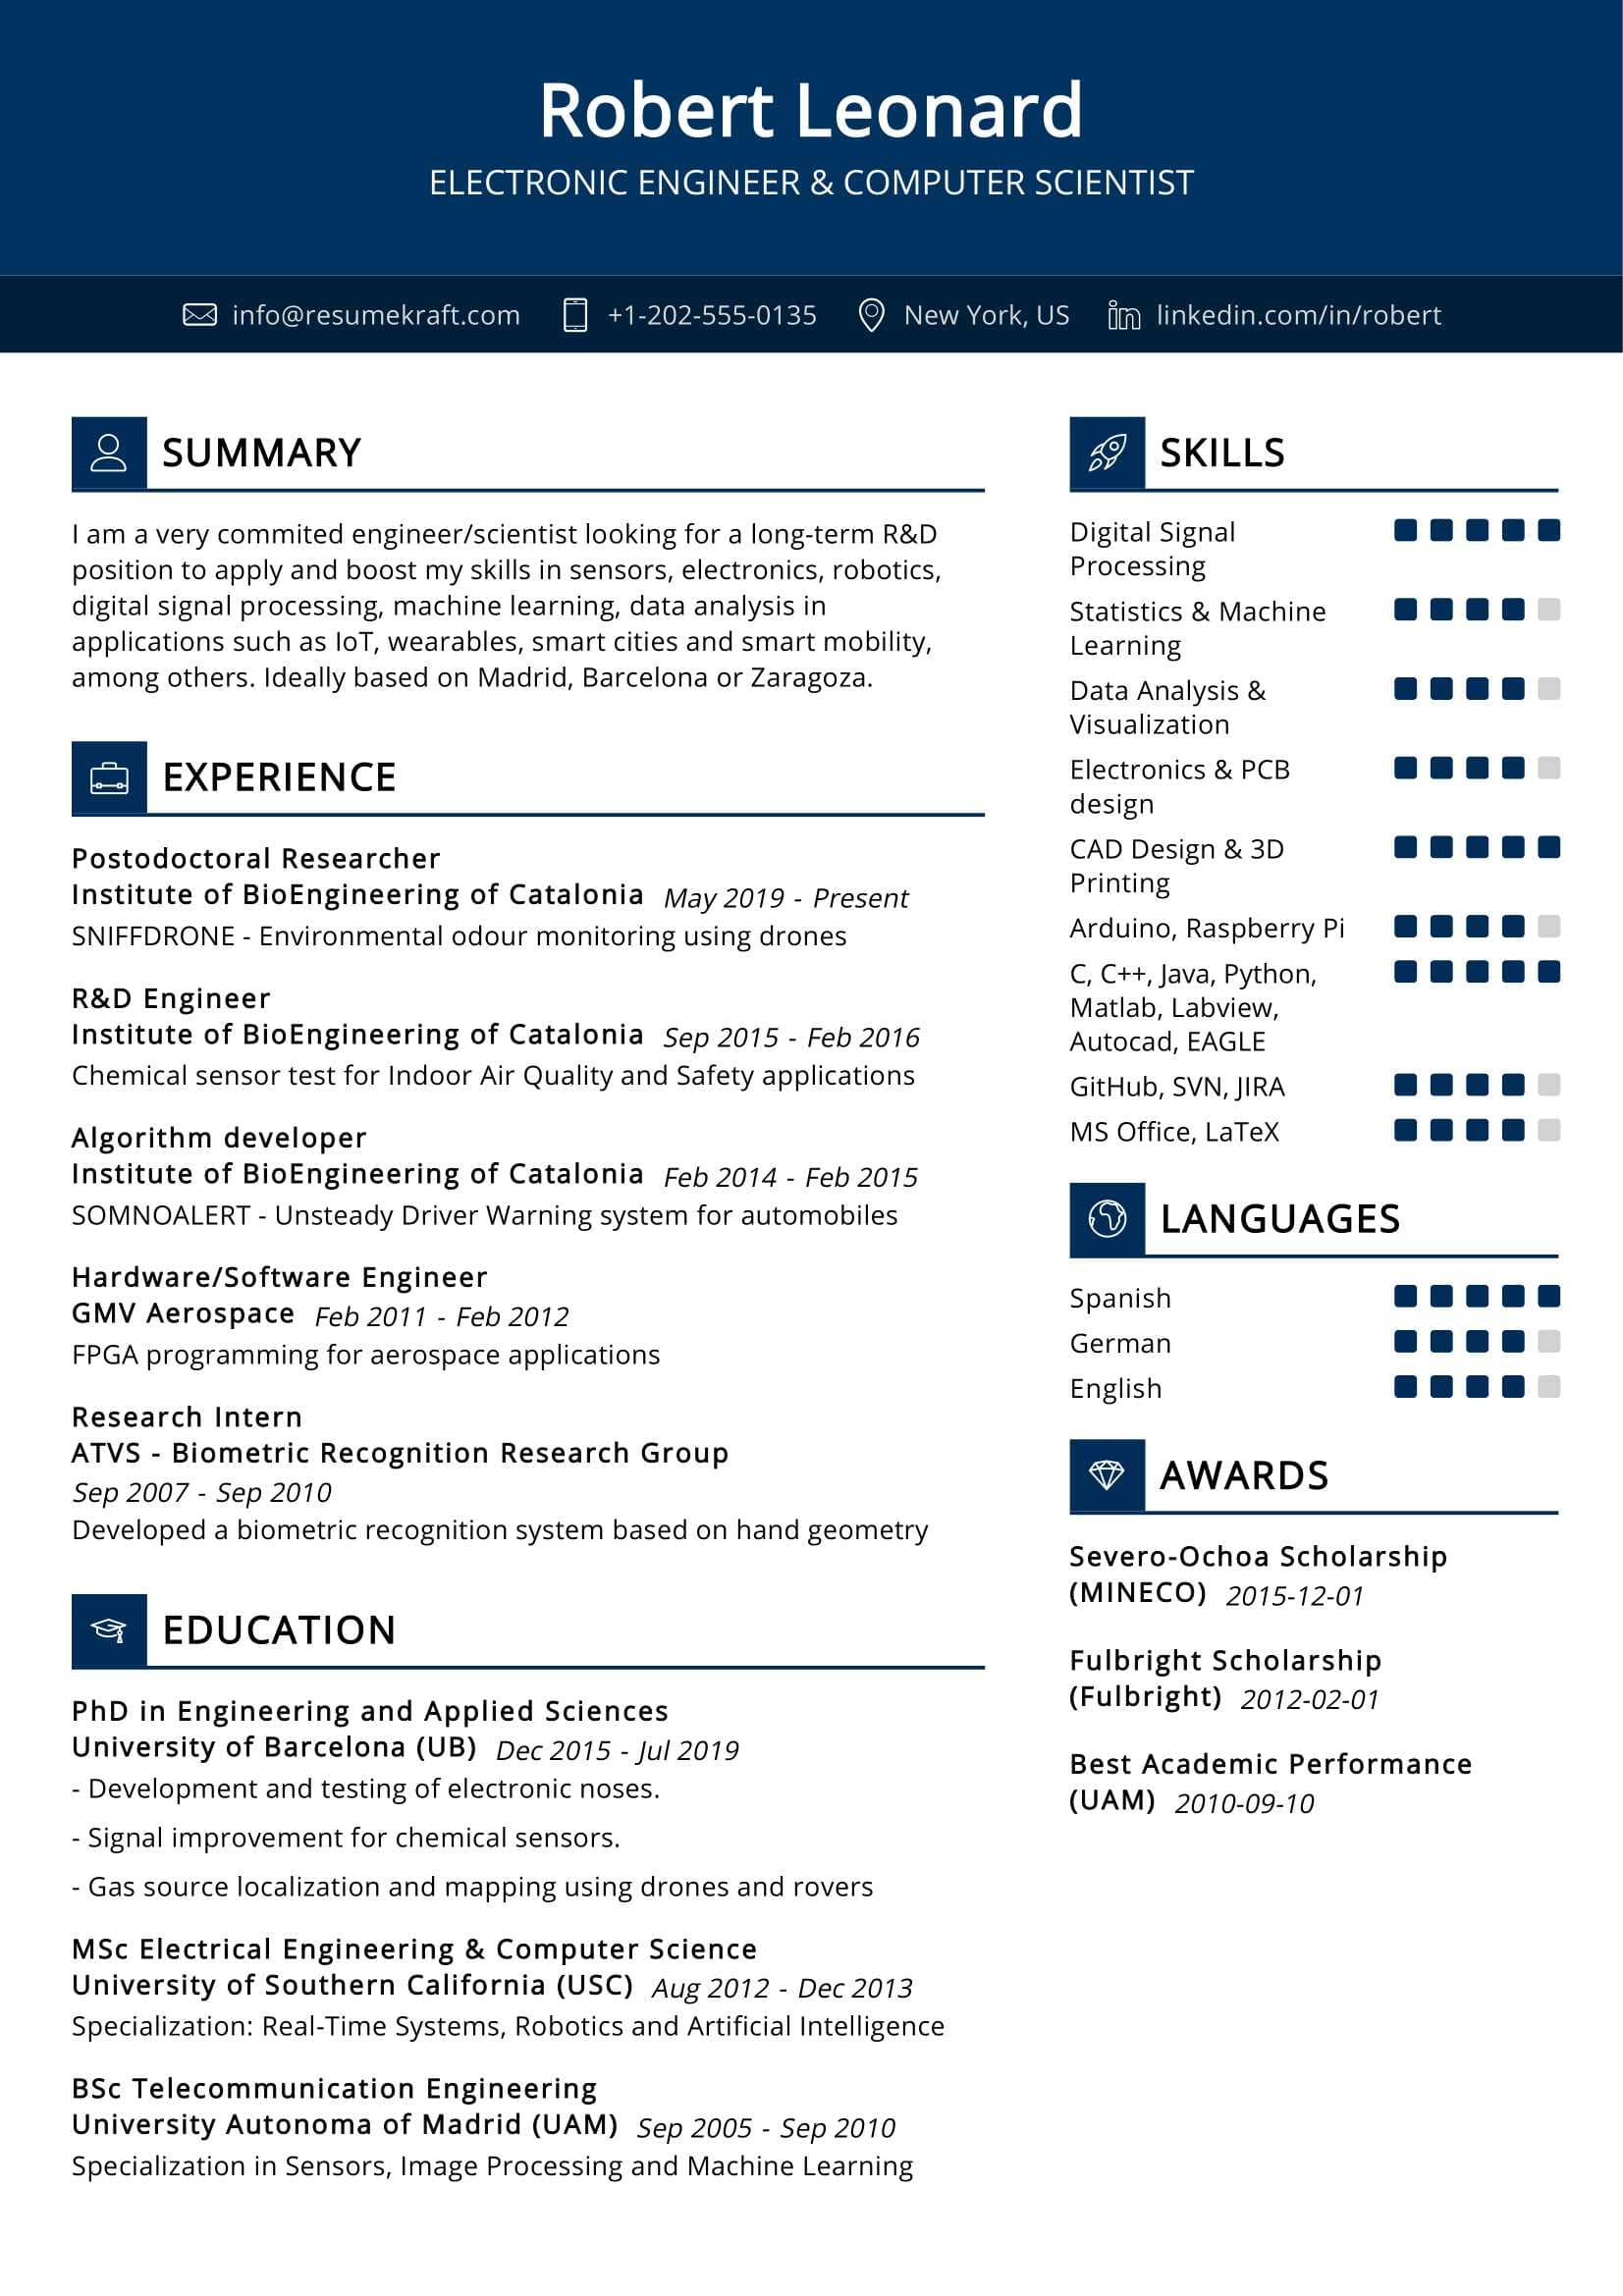 computer and information research scientists job summary